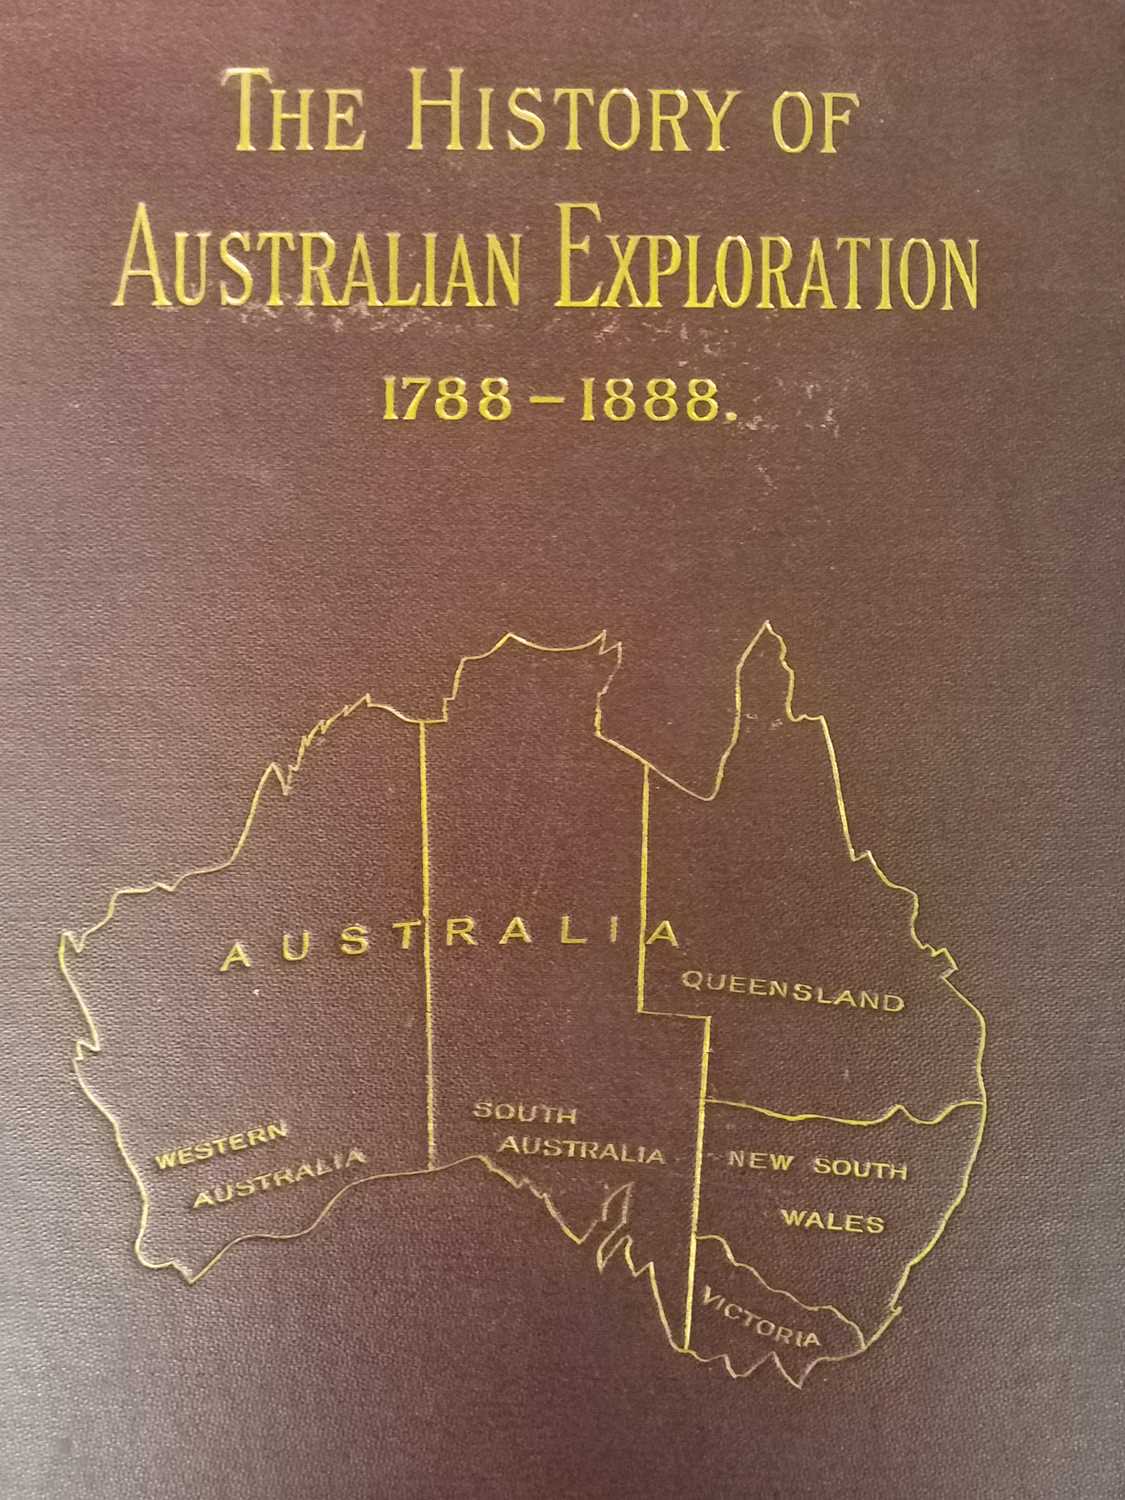 Lot 759 - Bibliography. A collection of Australian & American bibliography reference